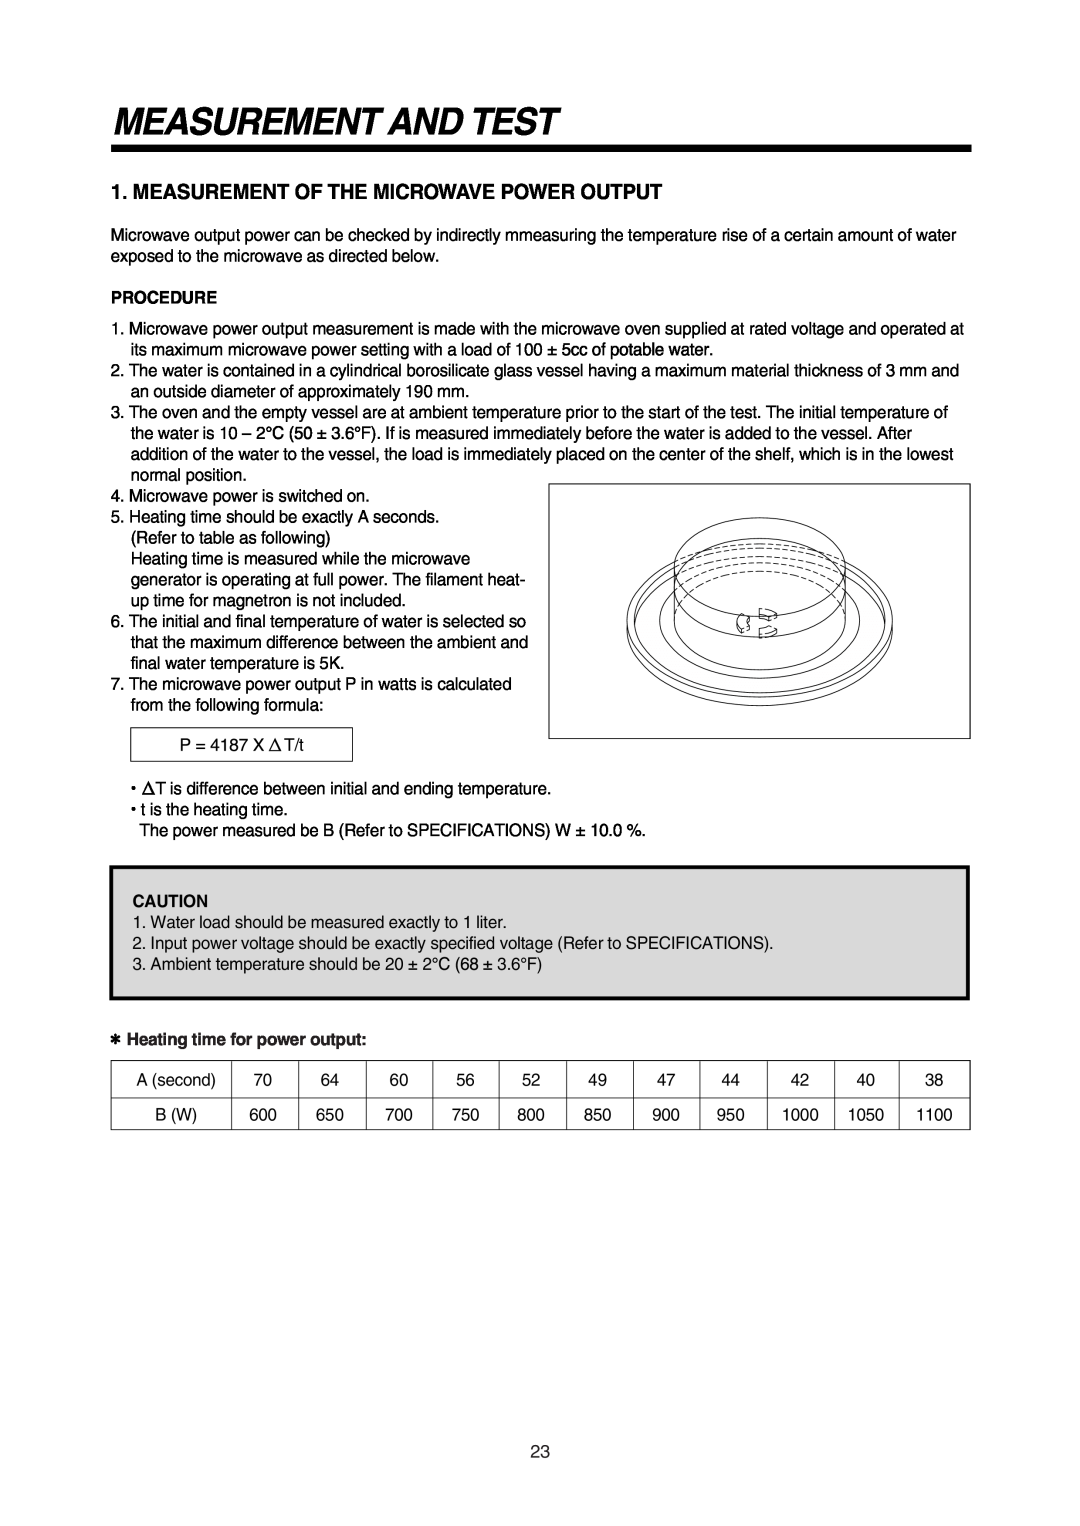 Daewoo 181GOA0A manual Measurement And Test, Measurement Of The Microwave Power Output 